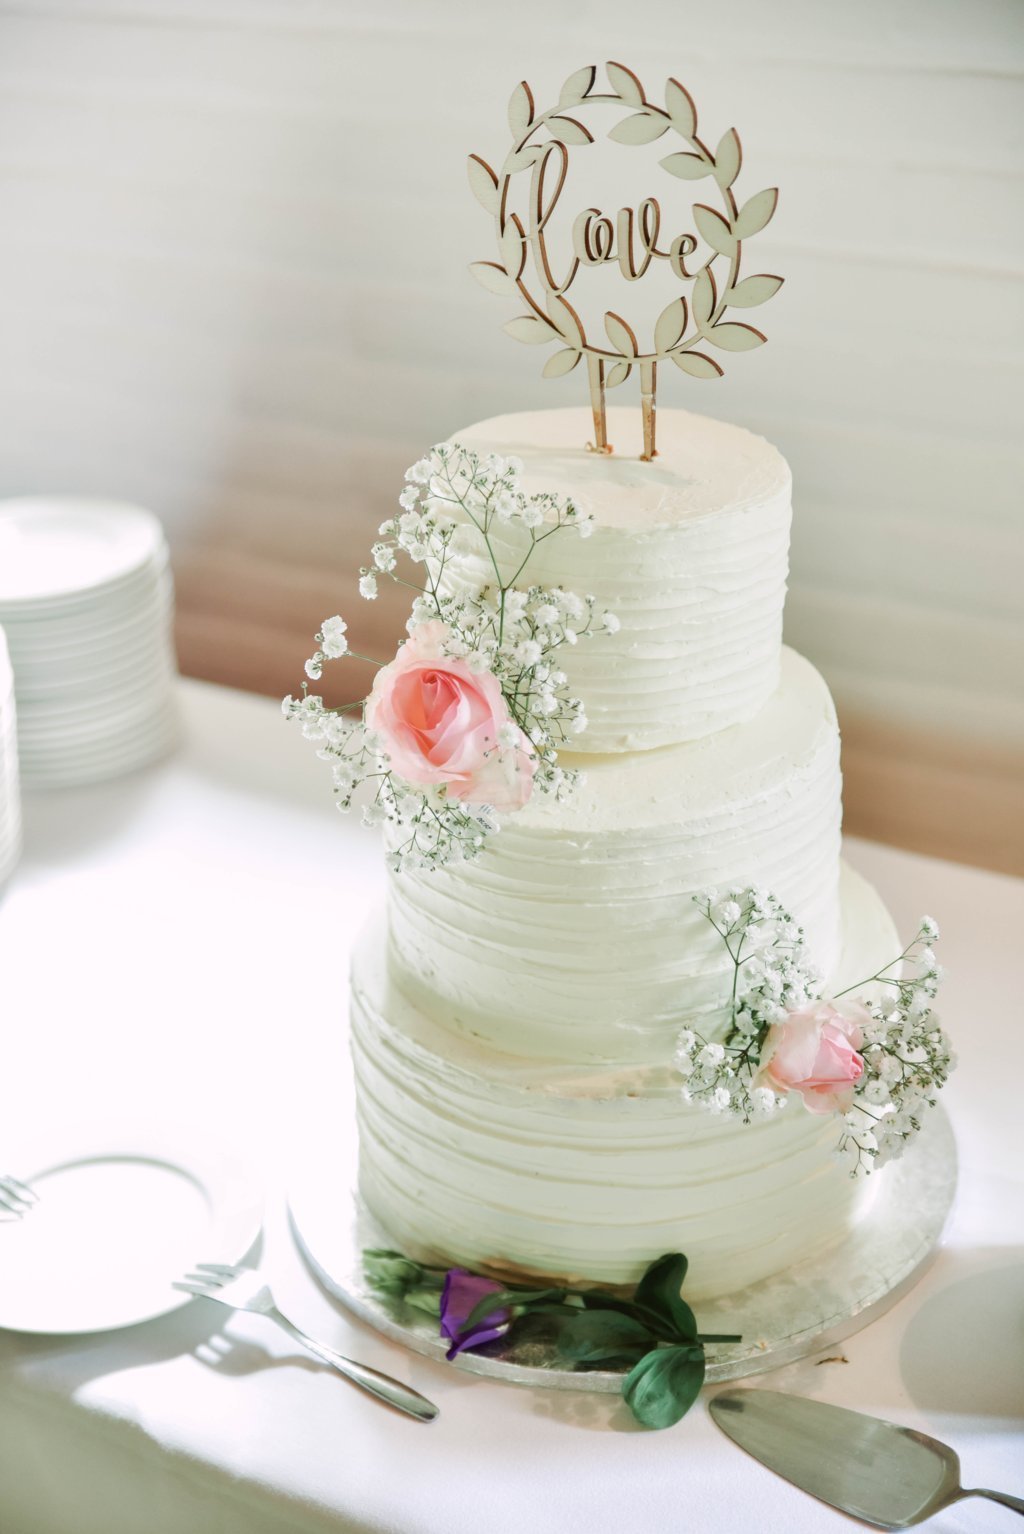 6 Trending Flavours for Your Engagement Cake | Wedding Planning and Ideas |  Wedding Blog